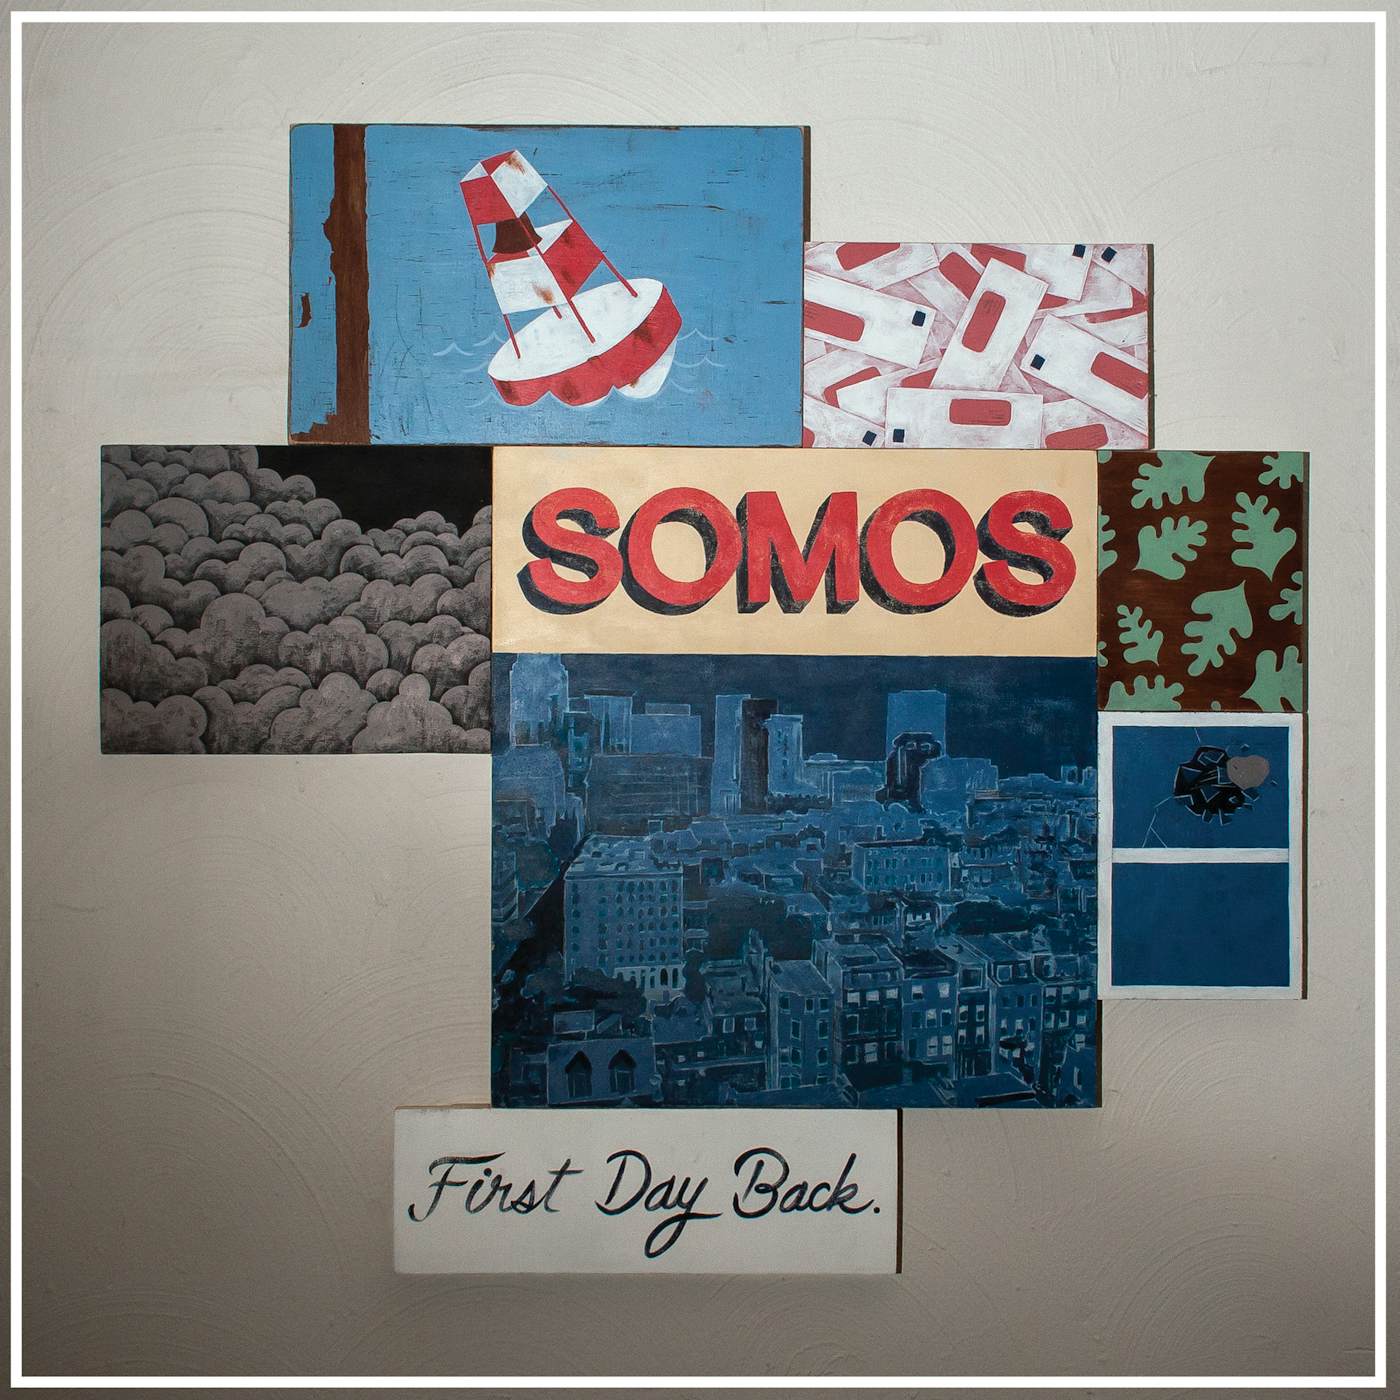 Somos First Day Back Vinyl Record